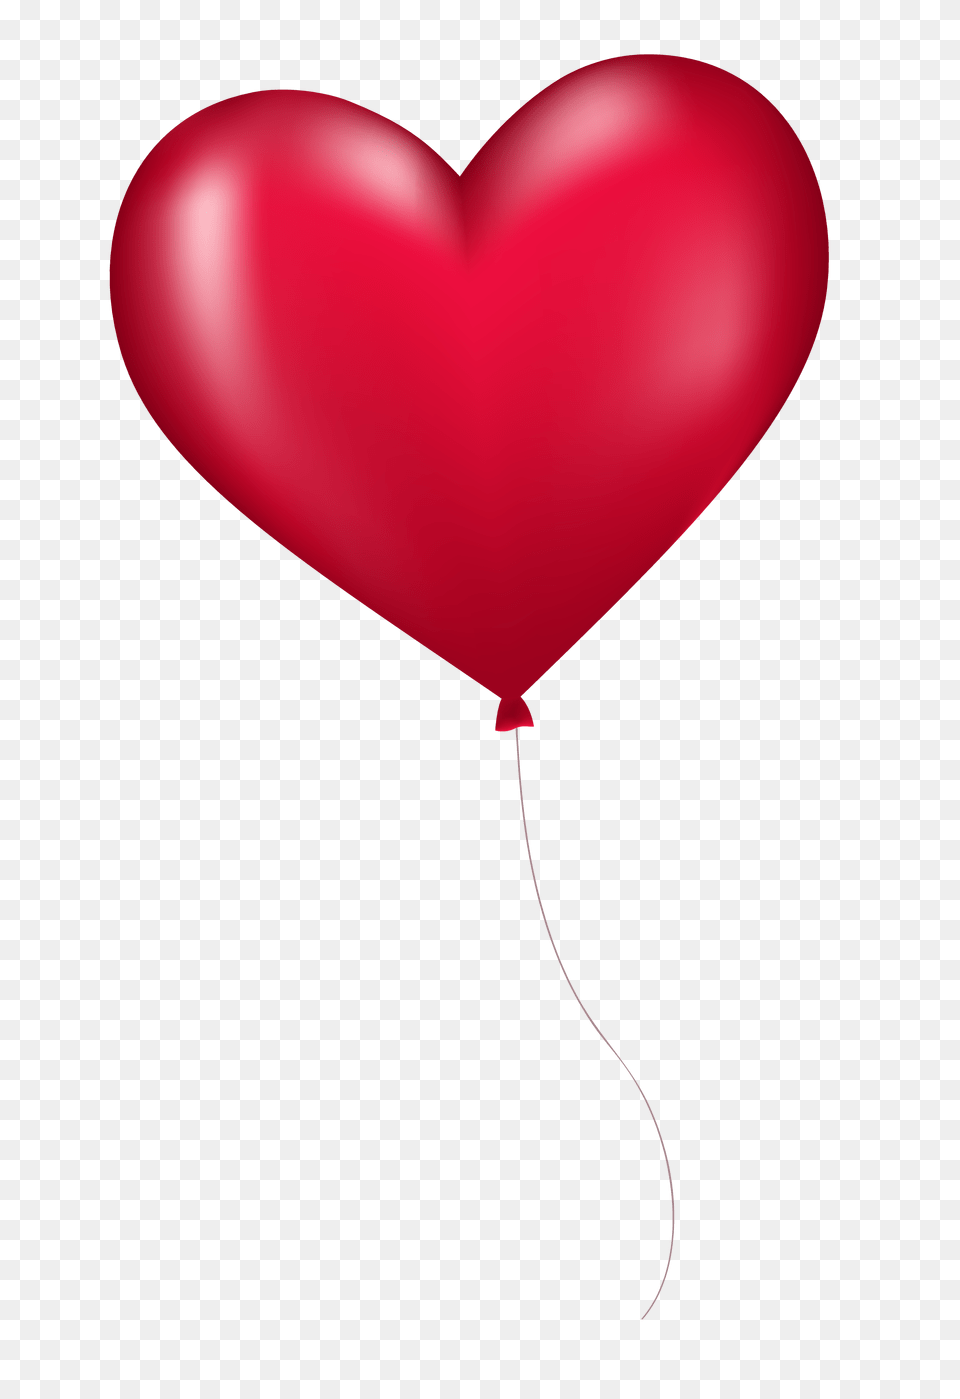 Pngpix Com Heart Balloon Image Free Png Download